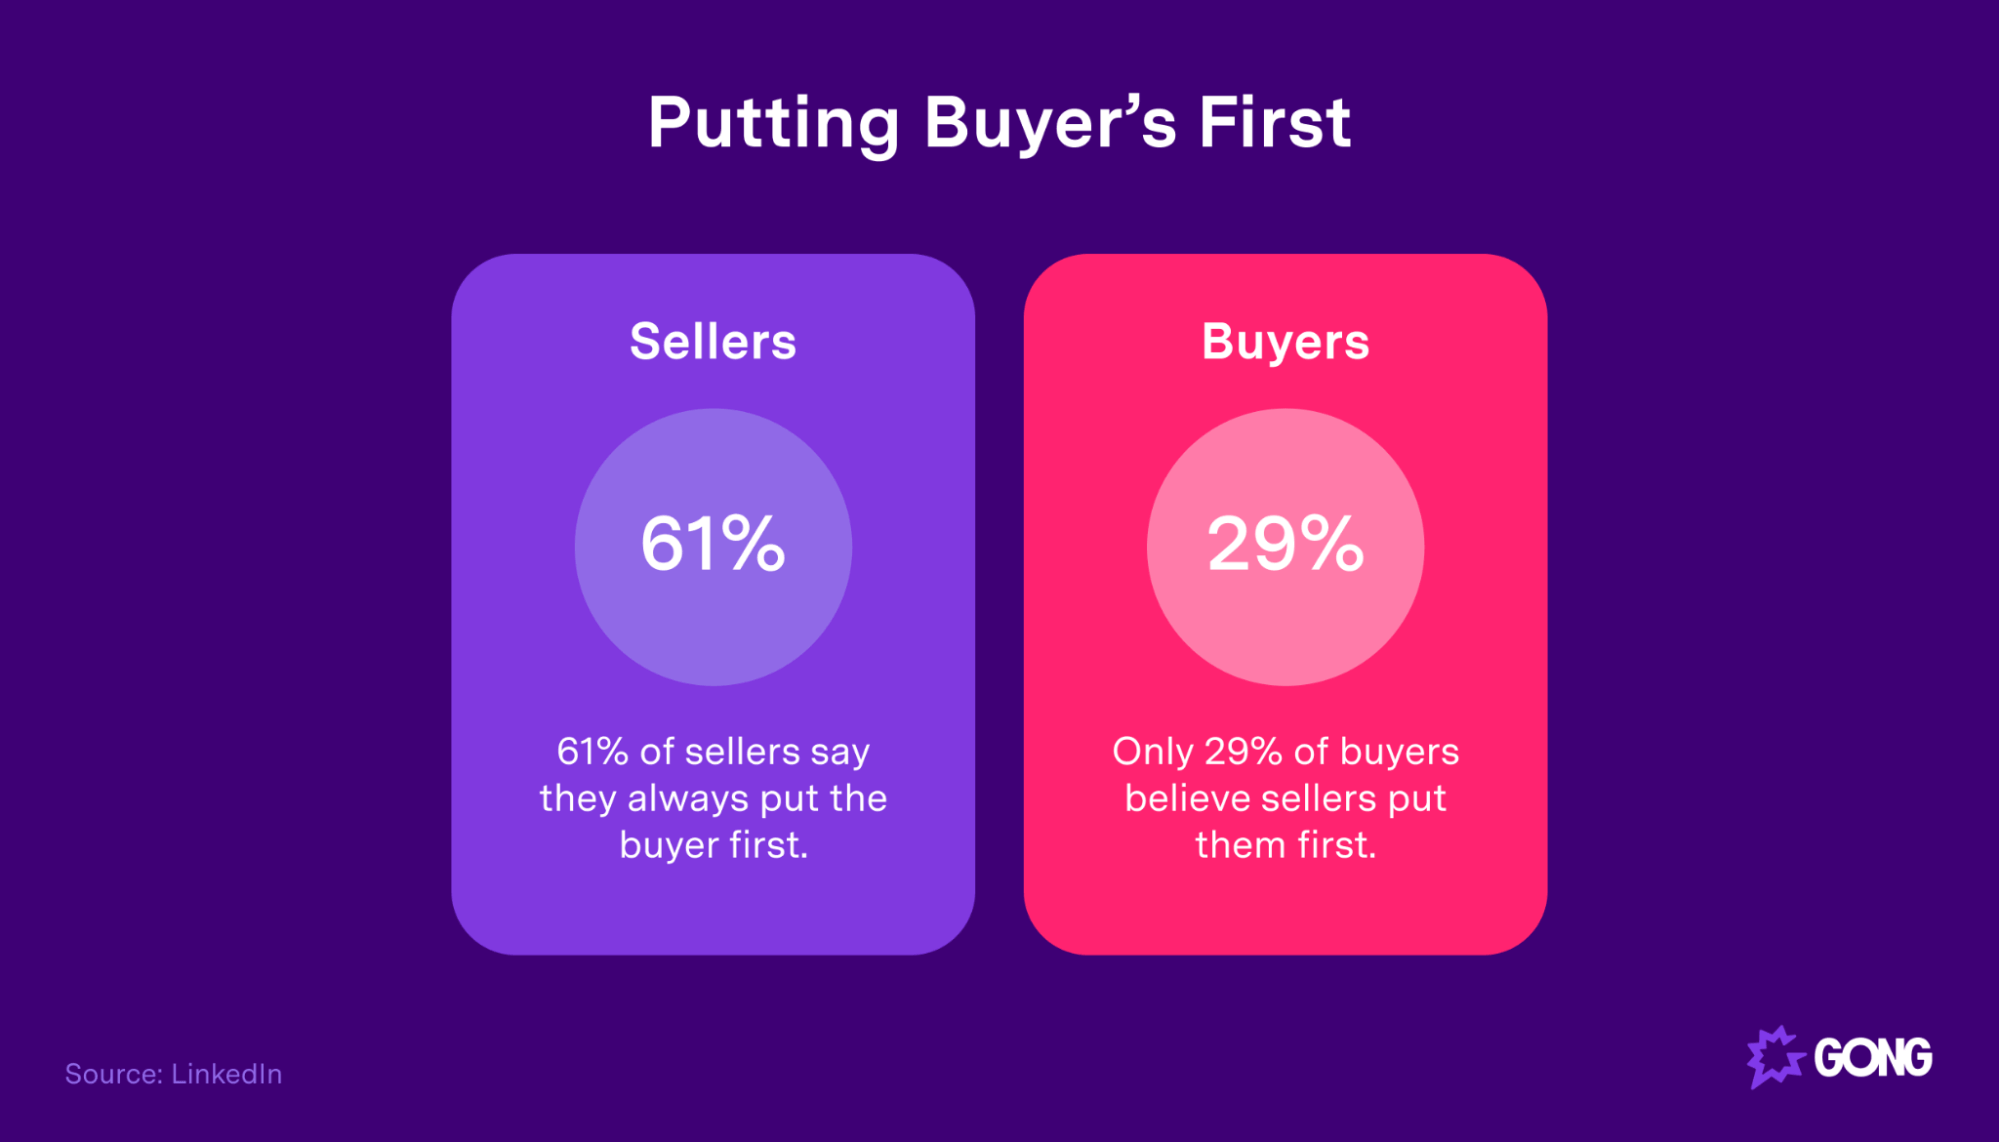 Most buyers don’t think sellers put them first